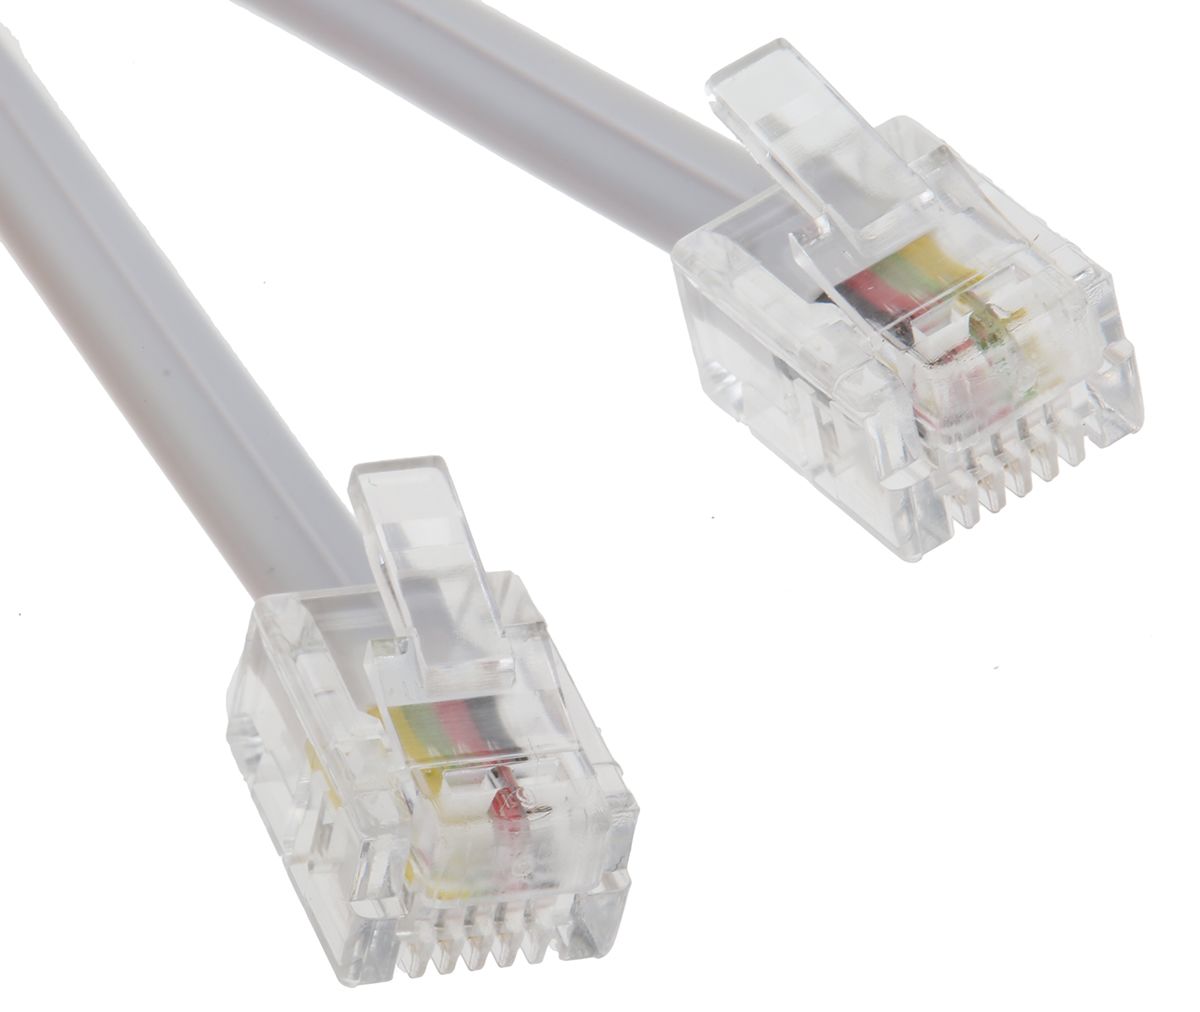 RS PRO Male RJ11 to Male RJ11 Telephone Extension Cable, White Sheath, 3m